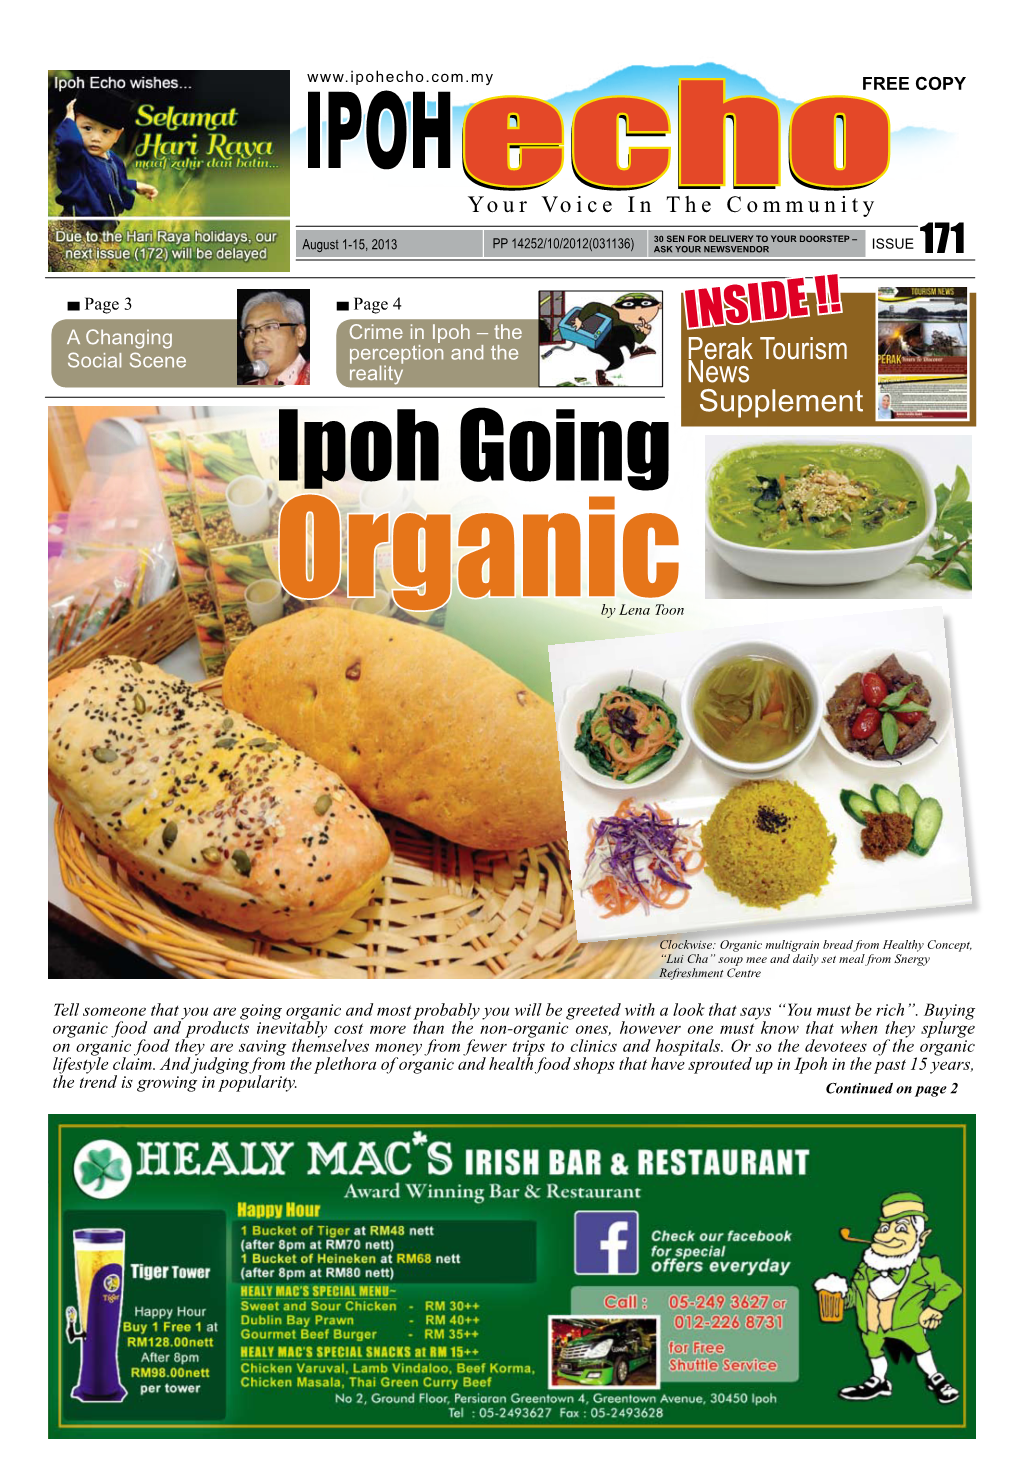 INSIDE !! Social Scene Perception and the Perak Tourism Reality News Supplement Ipoh Going